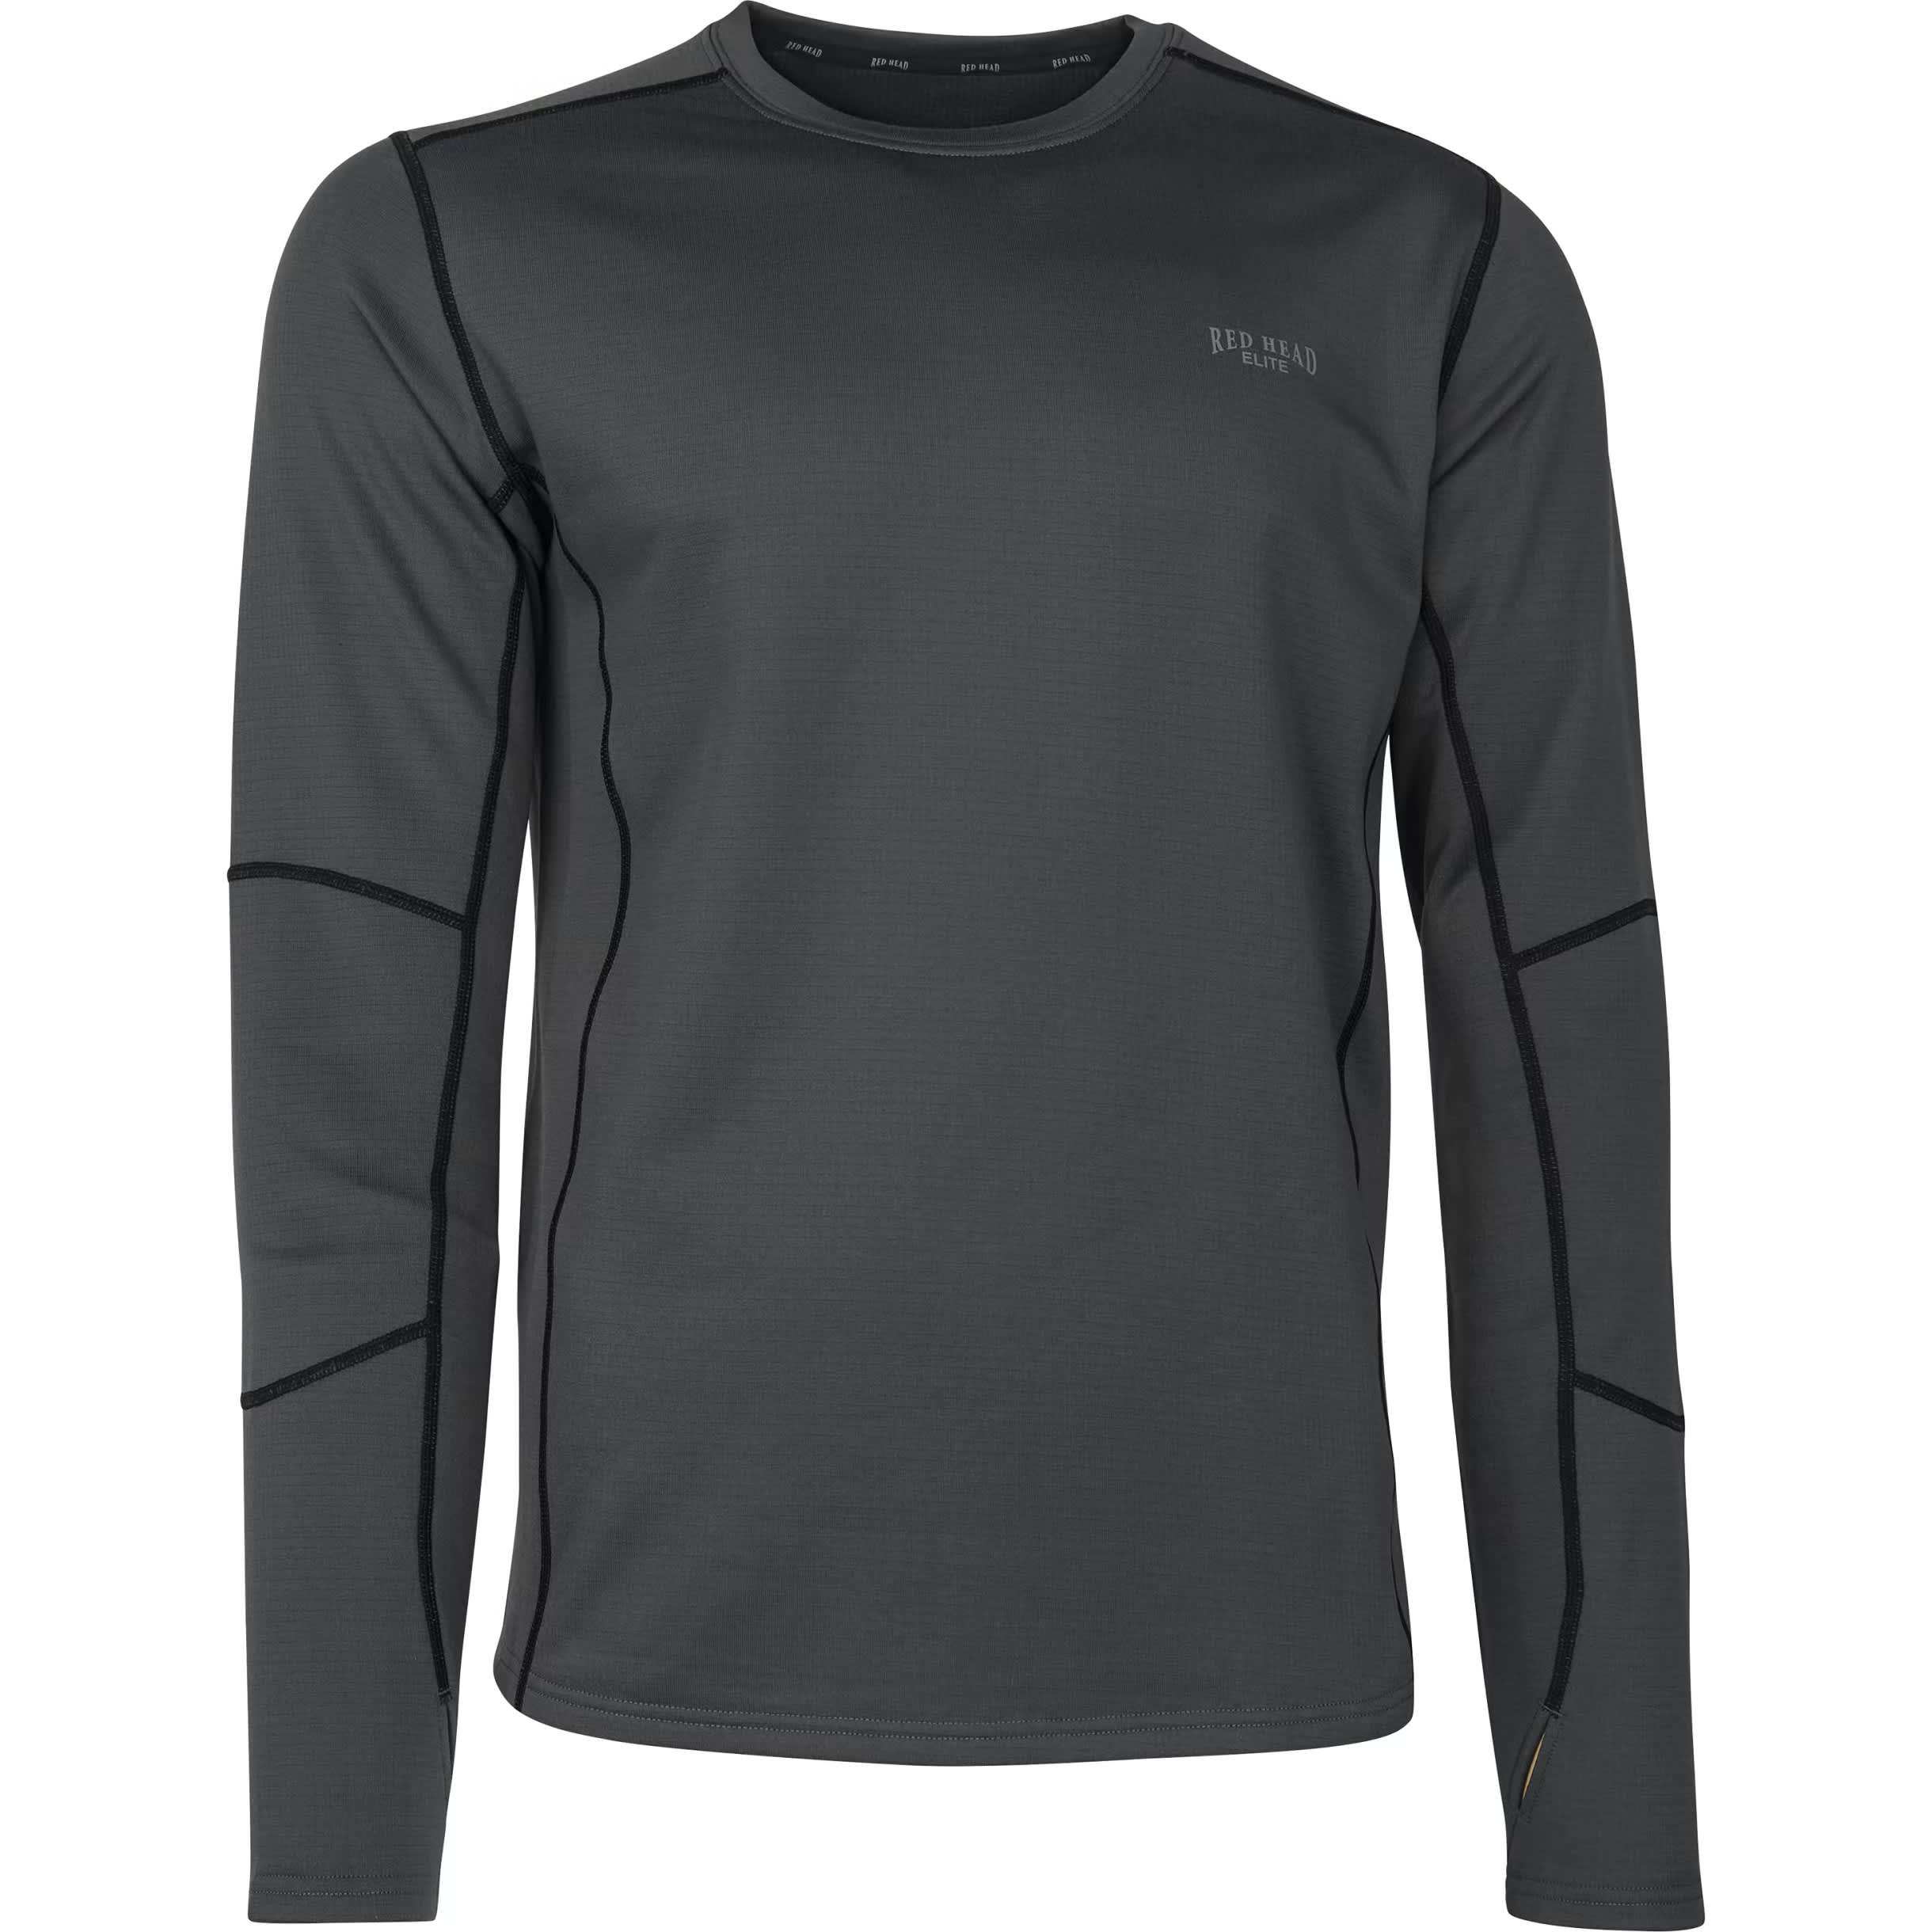 Under Armour® Men's ColdGear® Base 3.0 Series Packaged Long-Sleeve